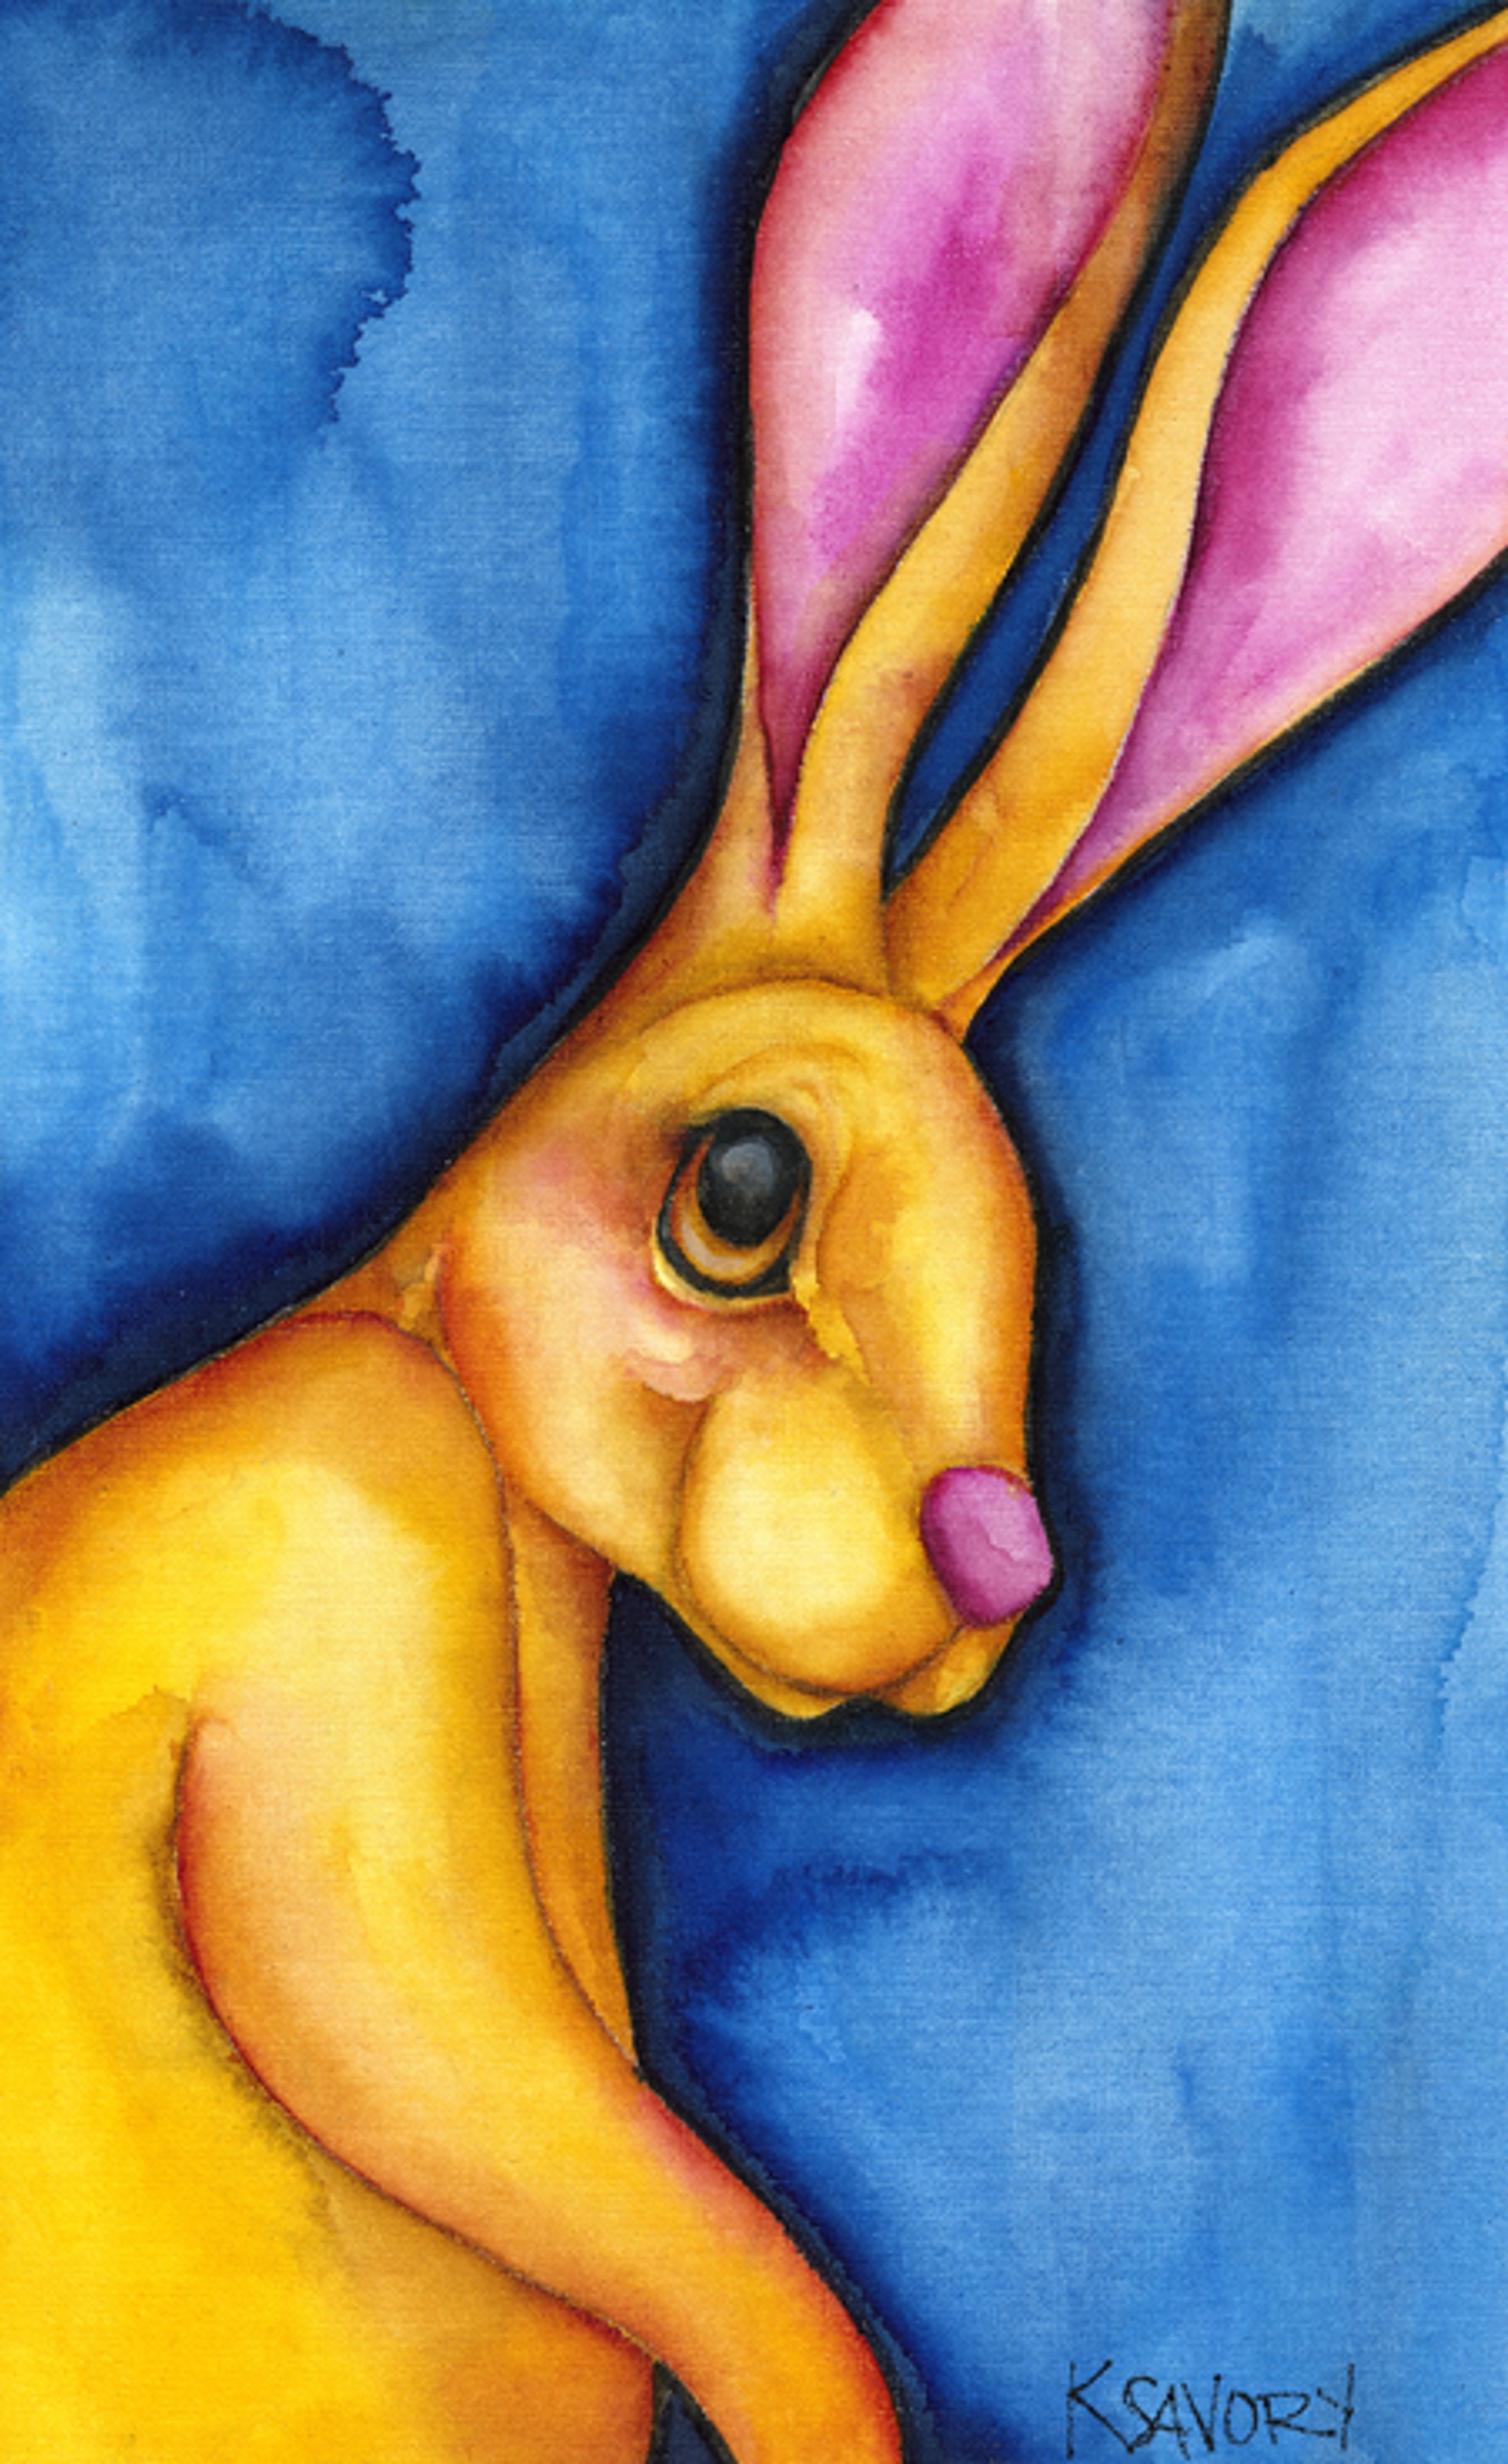 Neither Here Nor Hare by Karen Savory